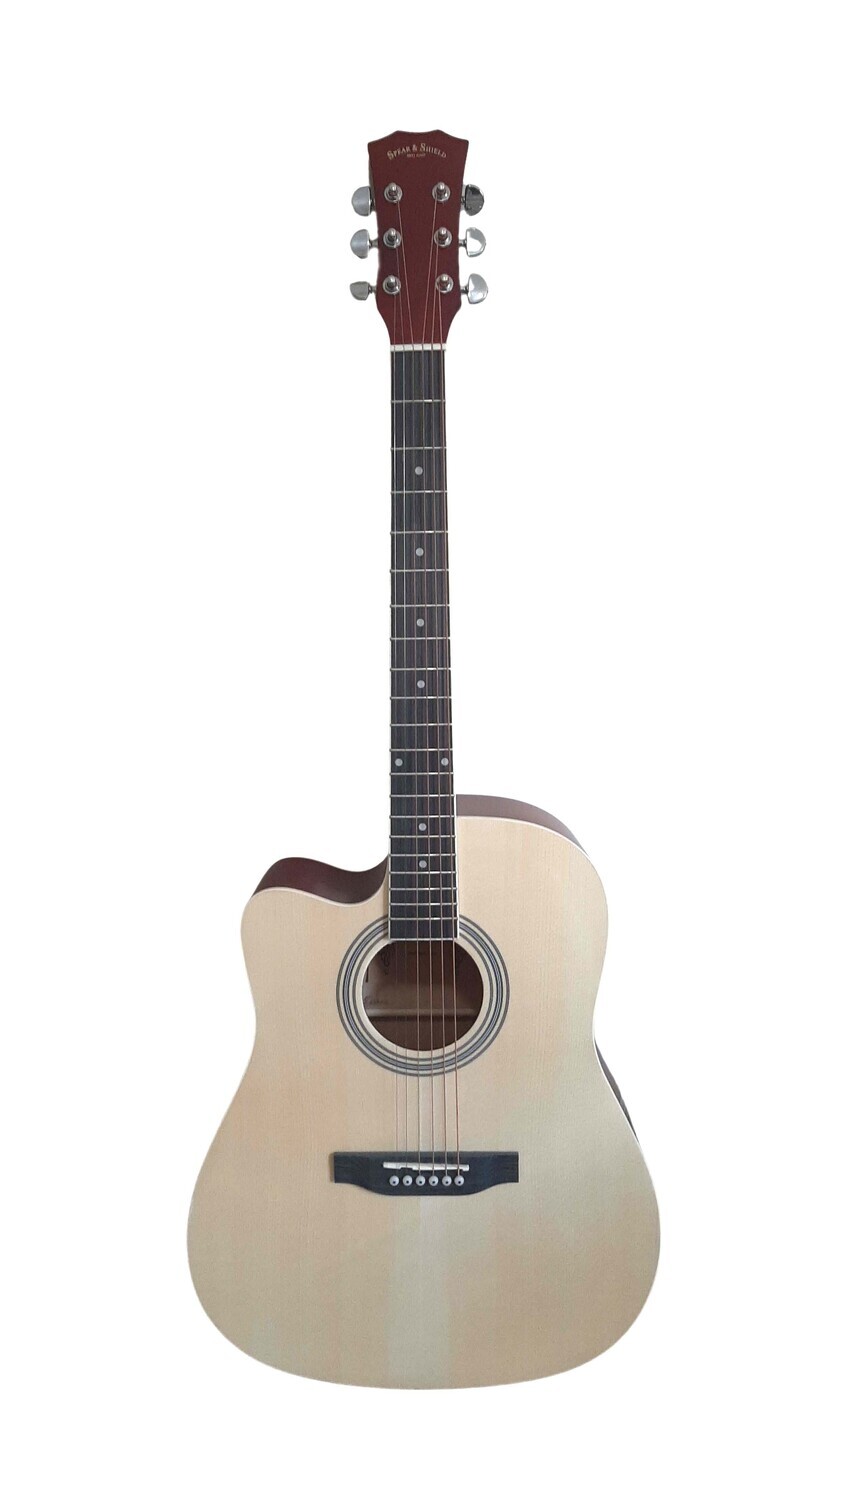 Spear & Shield Left handed Acoustic Guitar for Beginners Adults Students Intermediate players 41-inch full-size Dreadnought body cutaway Natural SPS338LF Free Shipping